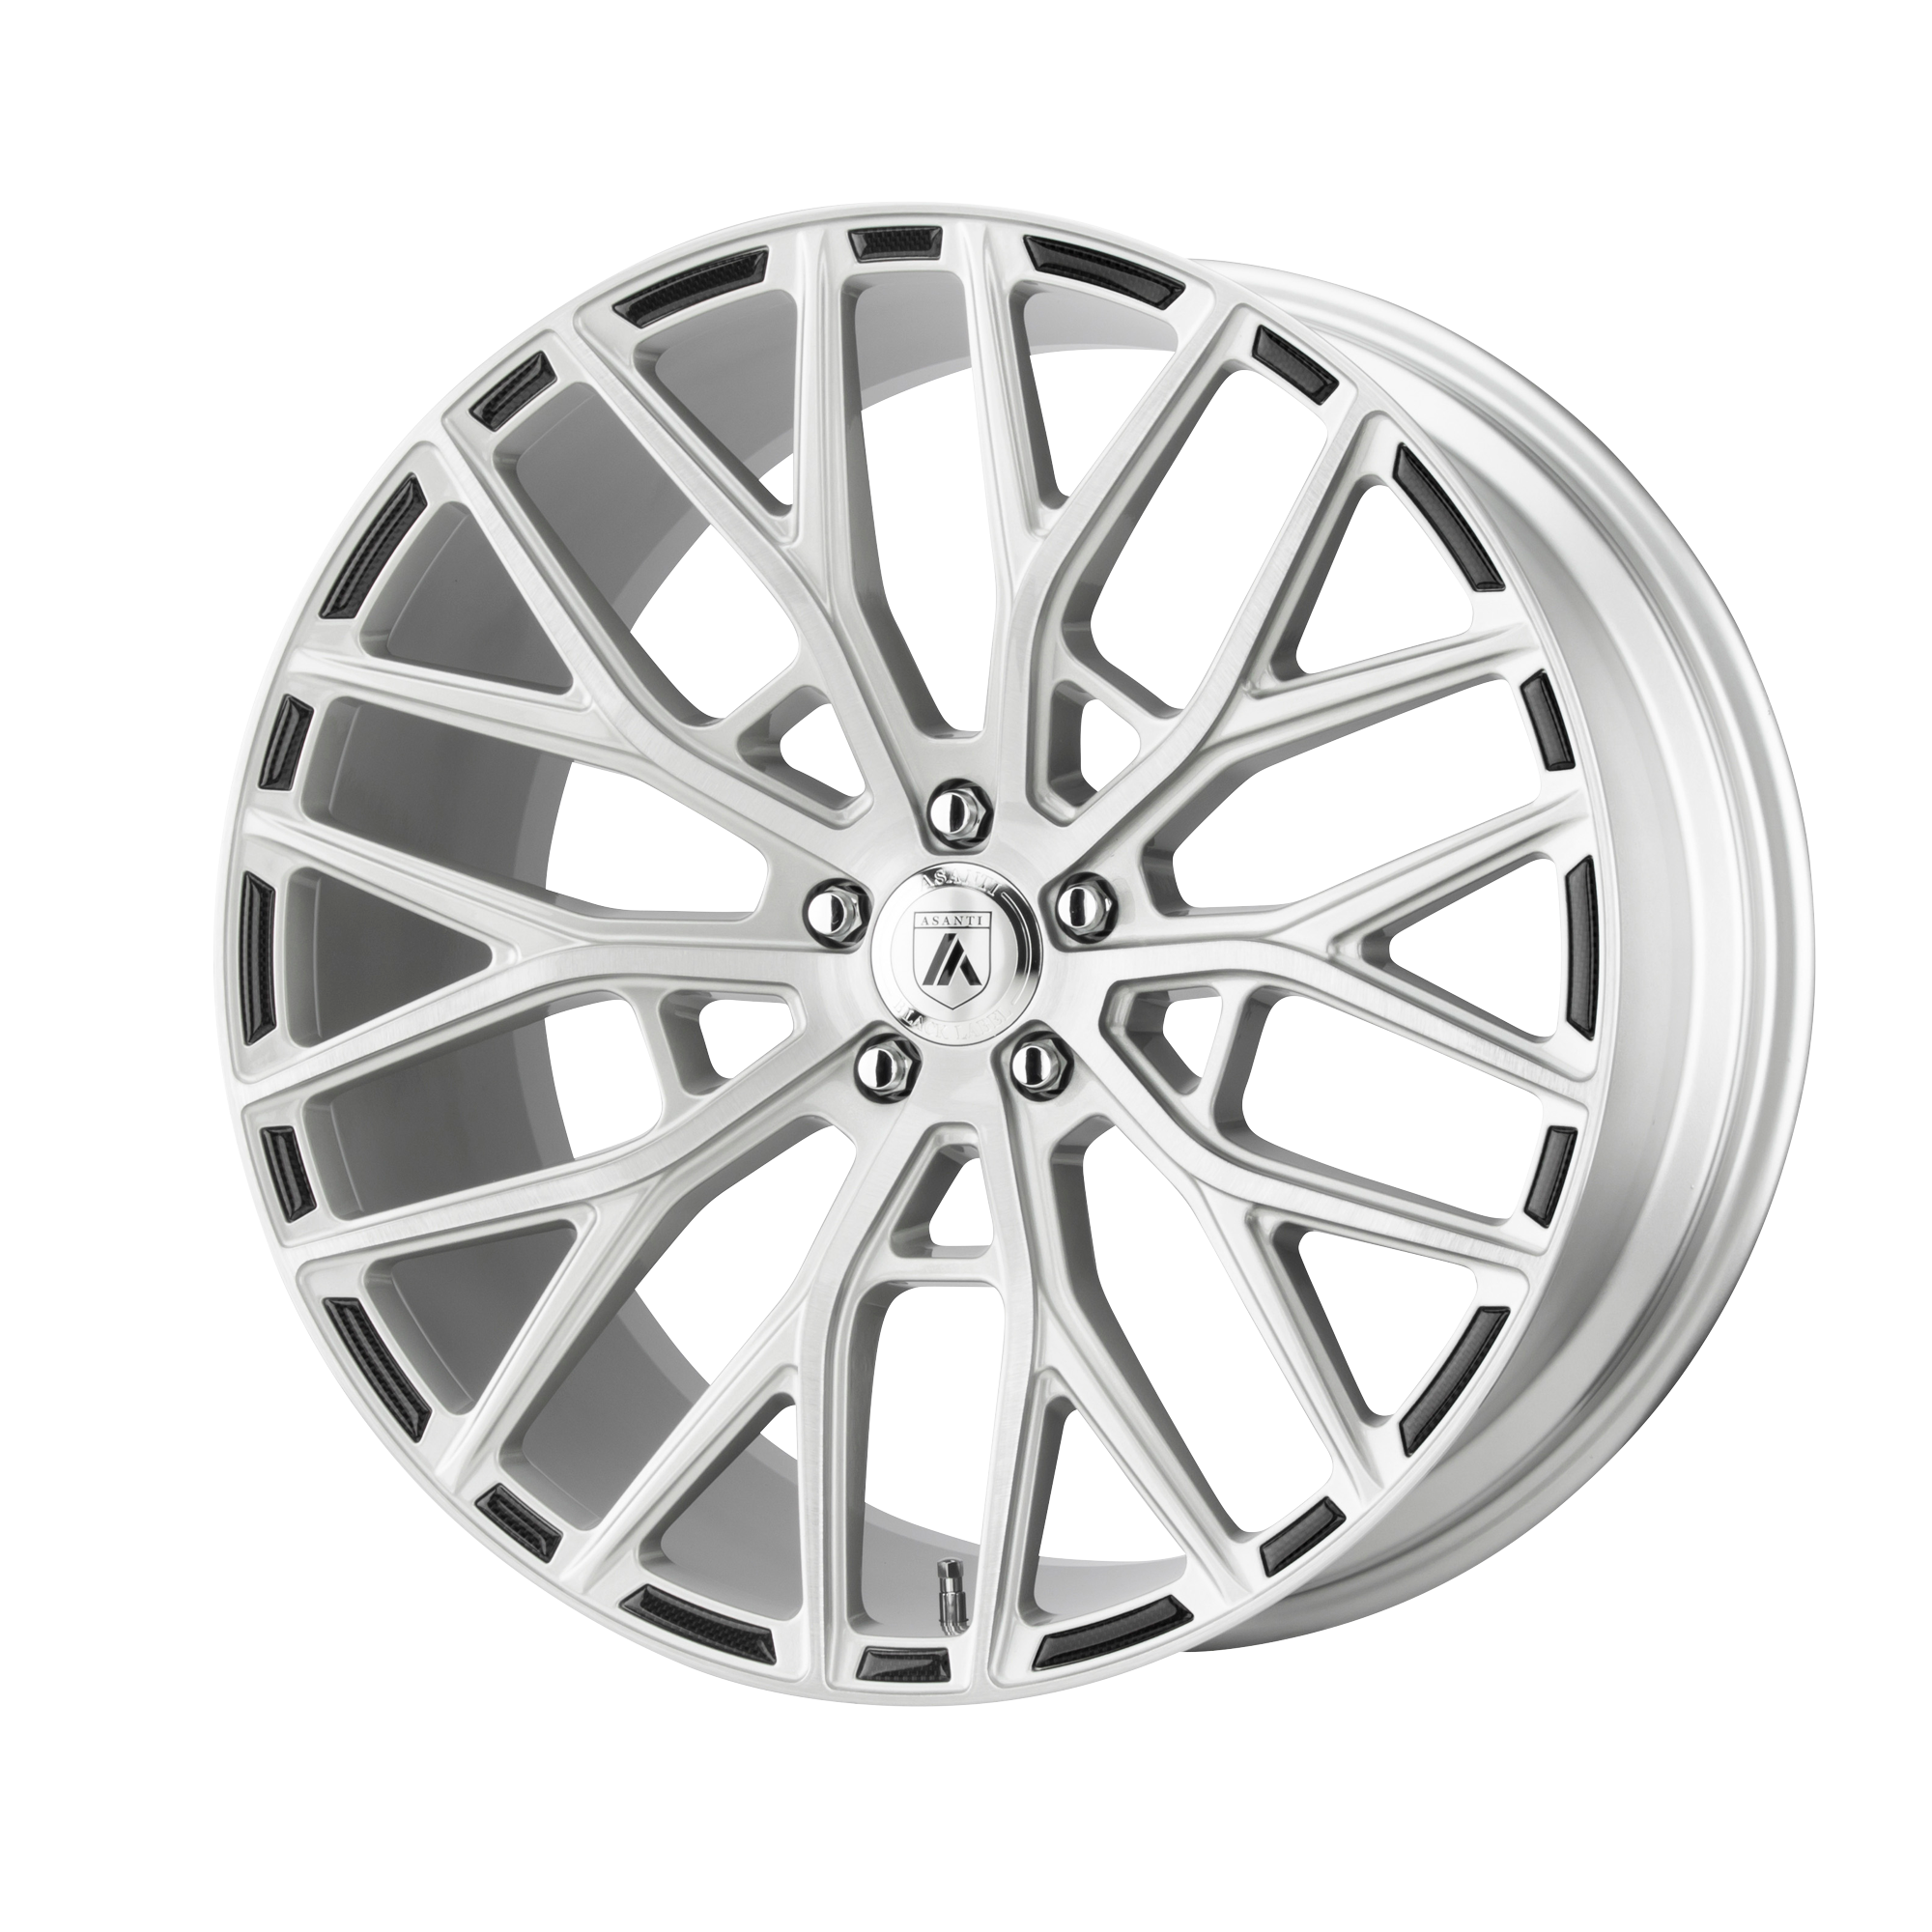 LEO 20x8.5 5x120.00 BRUSHED SILVER (38 mm) - Tires and Engine Performance